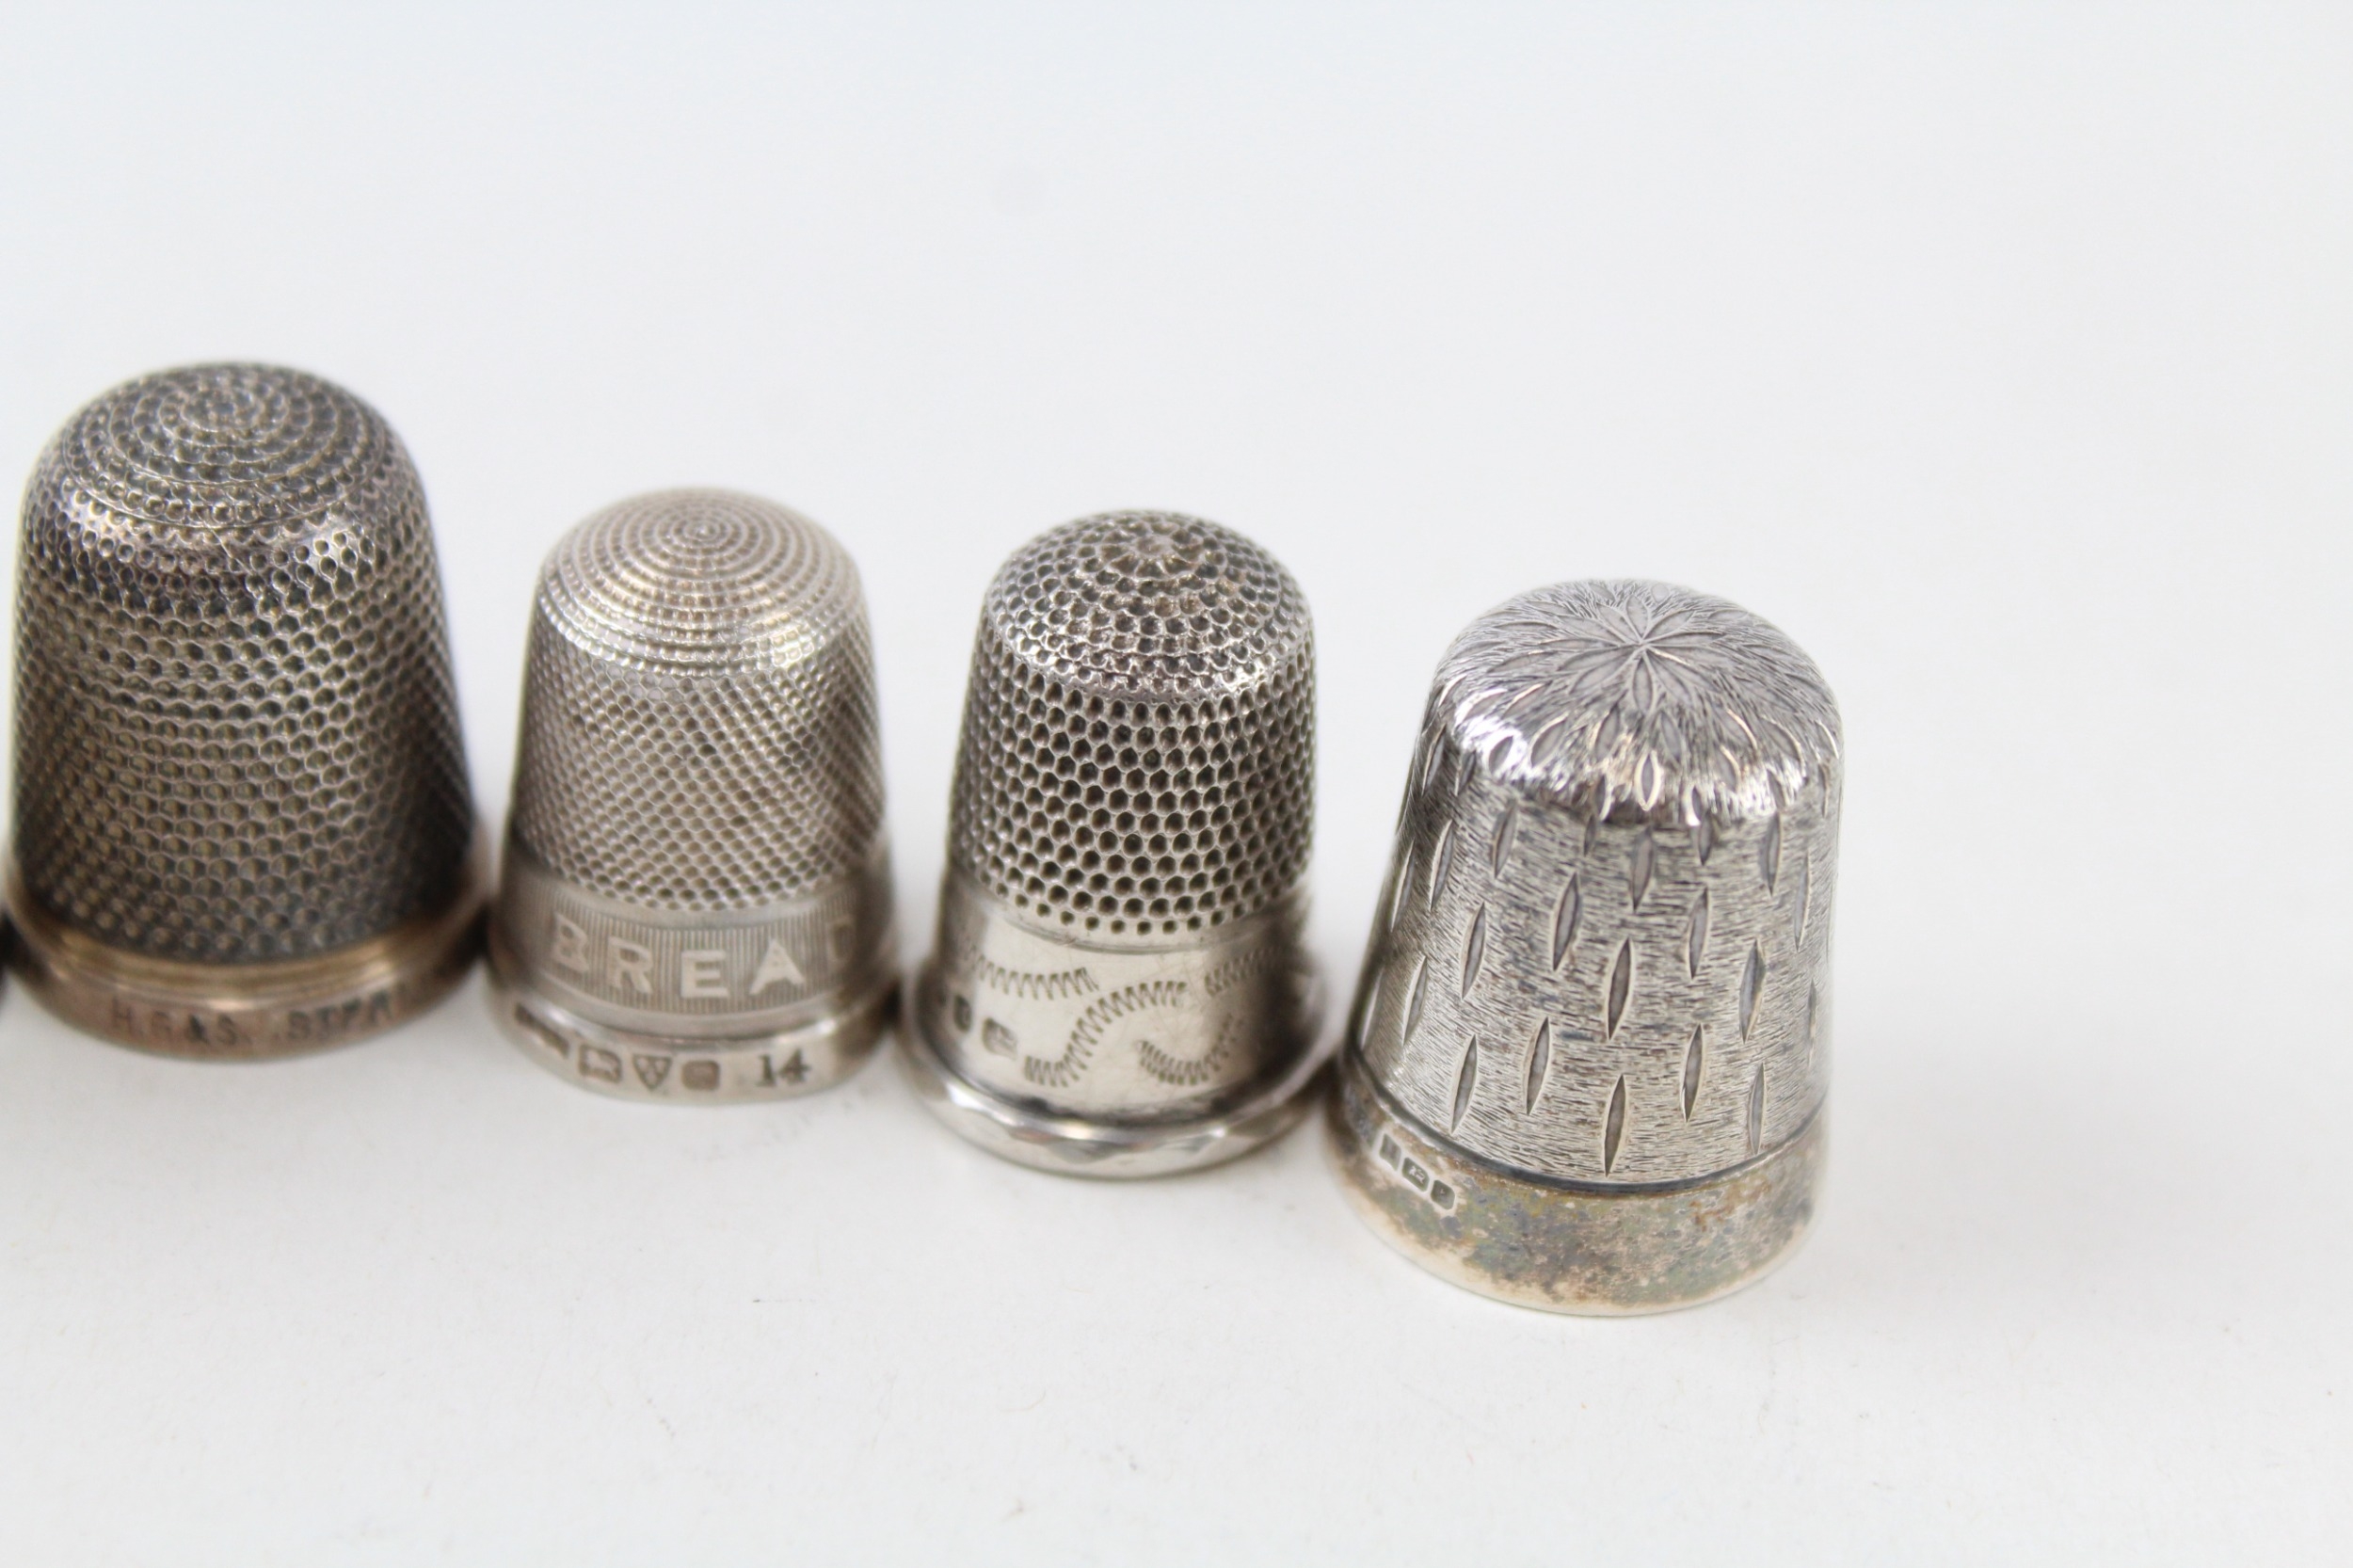 8 x .925 sterling thimbles - Image 4 of 4